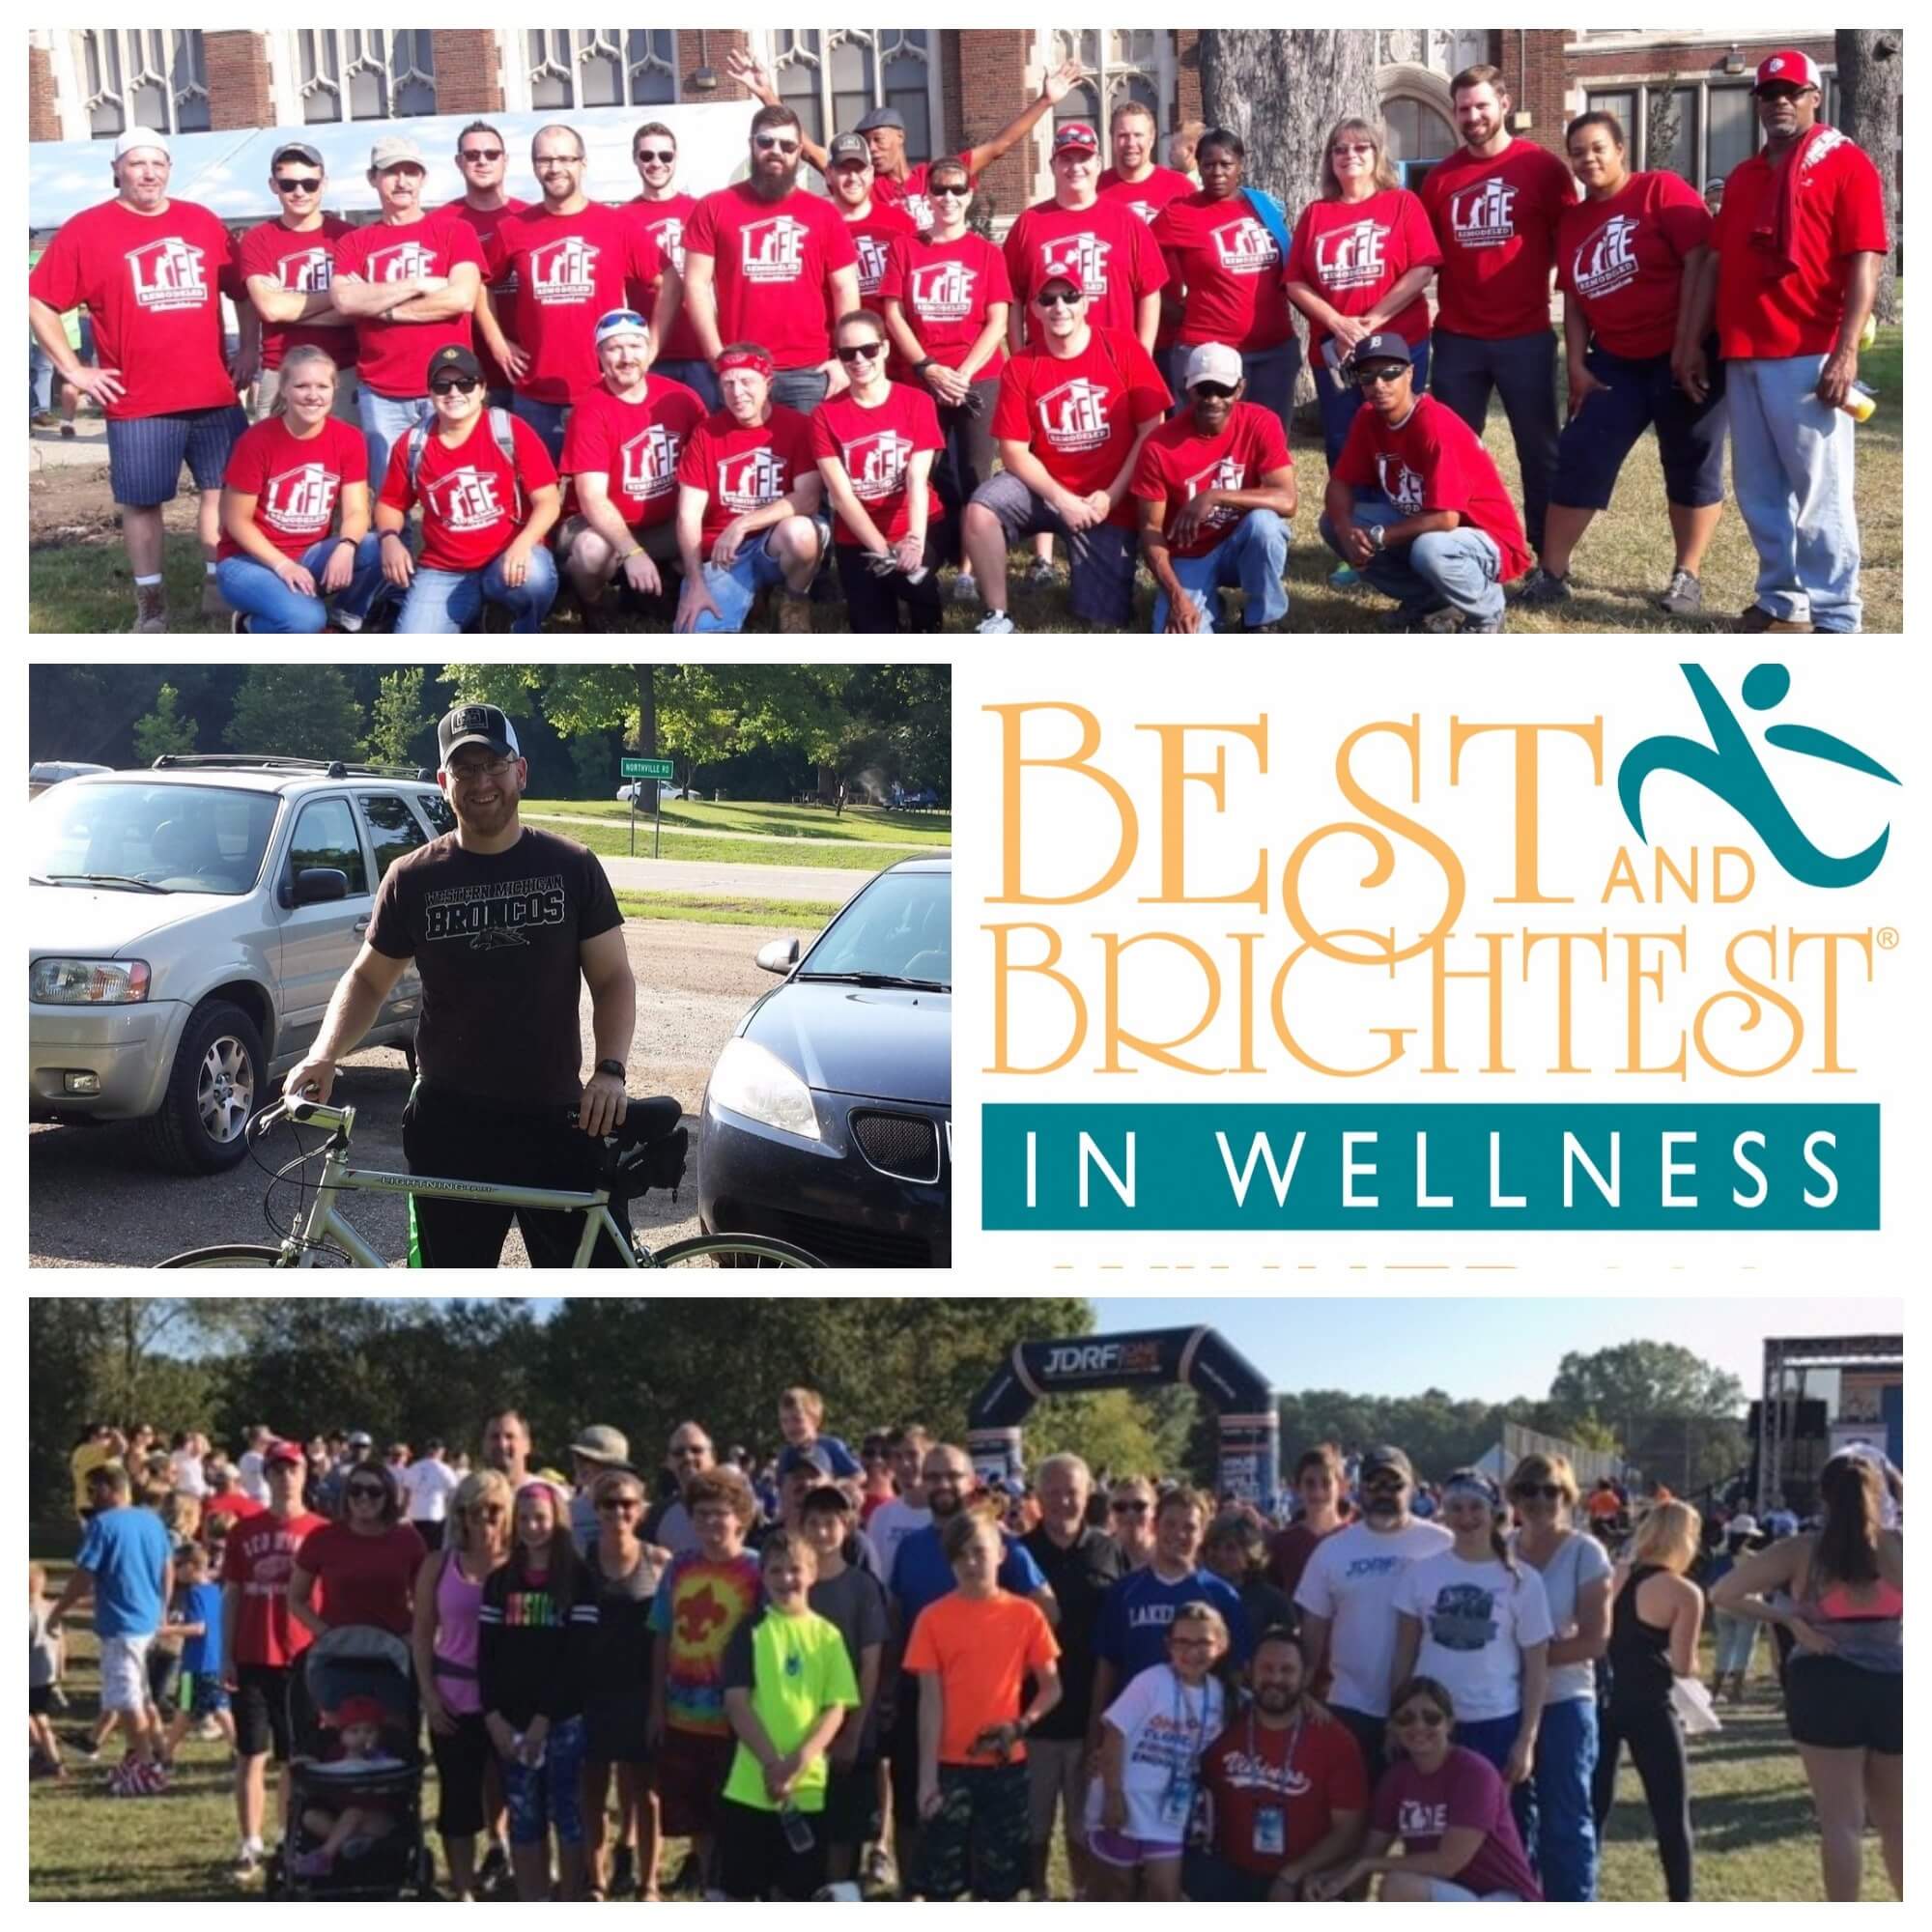 RedViking Named Best And Brightest For Wellness in 2017